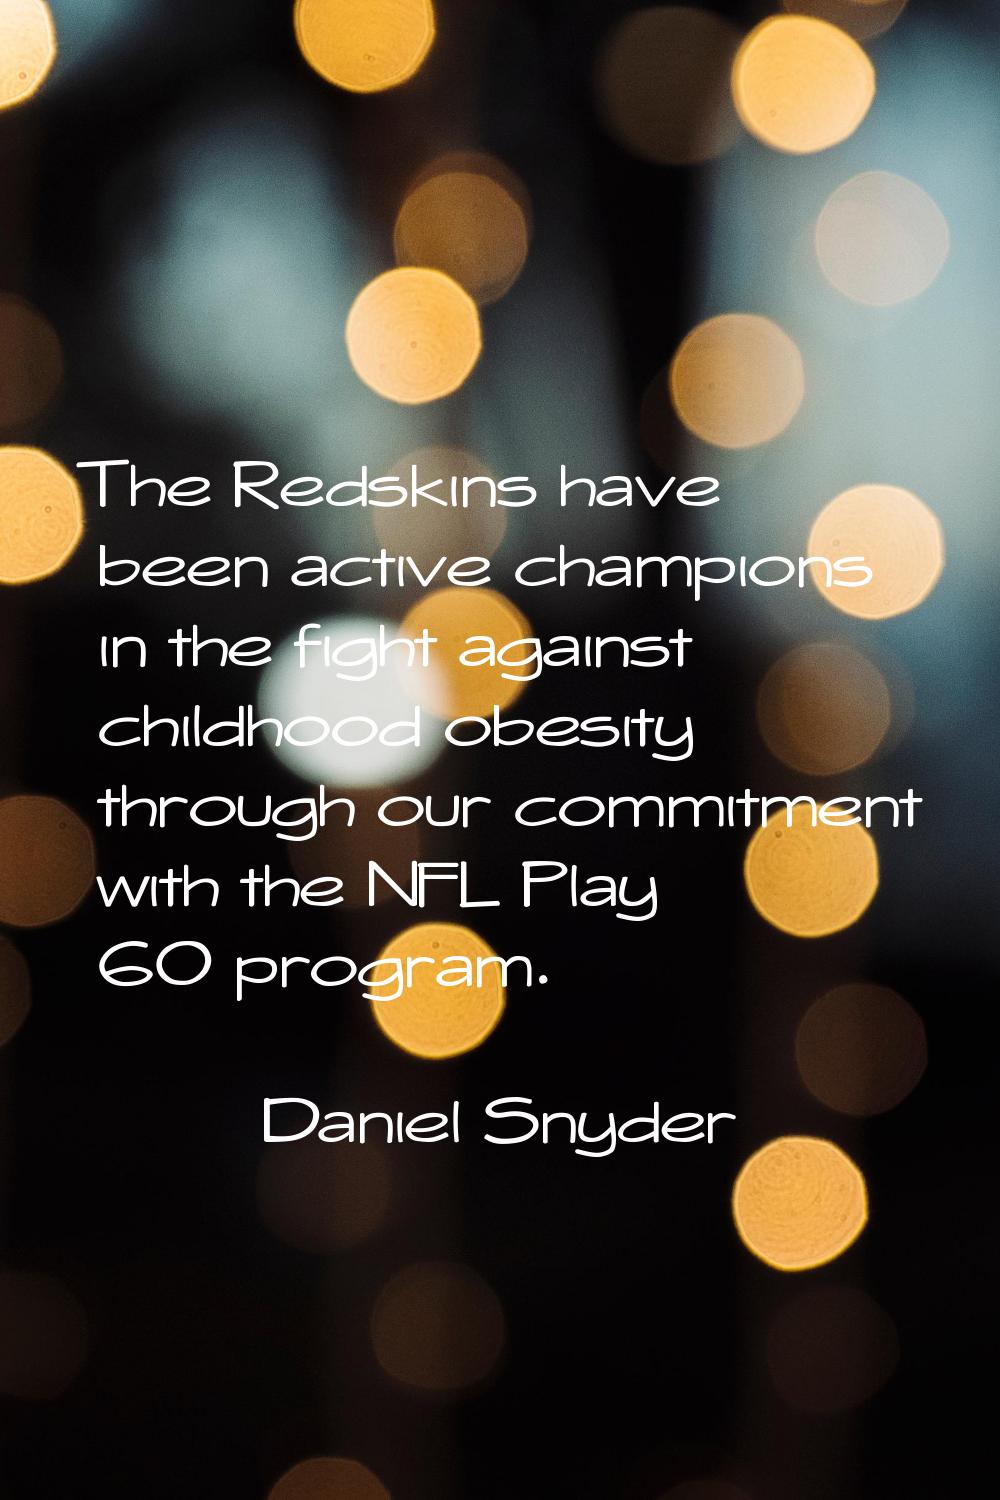 The Redskins have been active champions in the fight against childhood obesity through our commitme